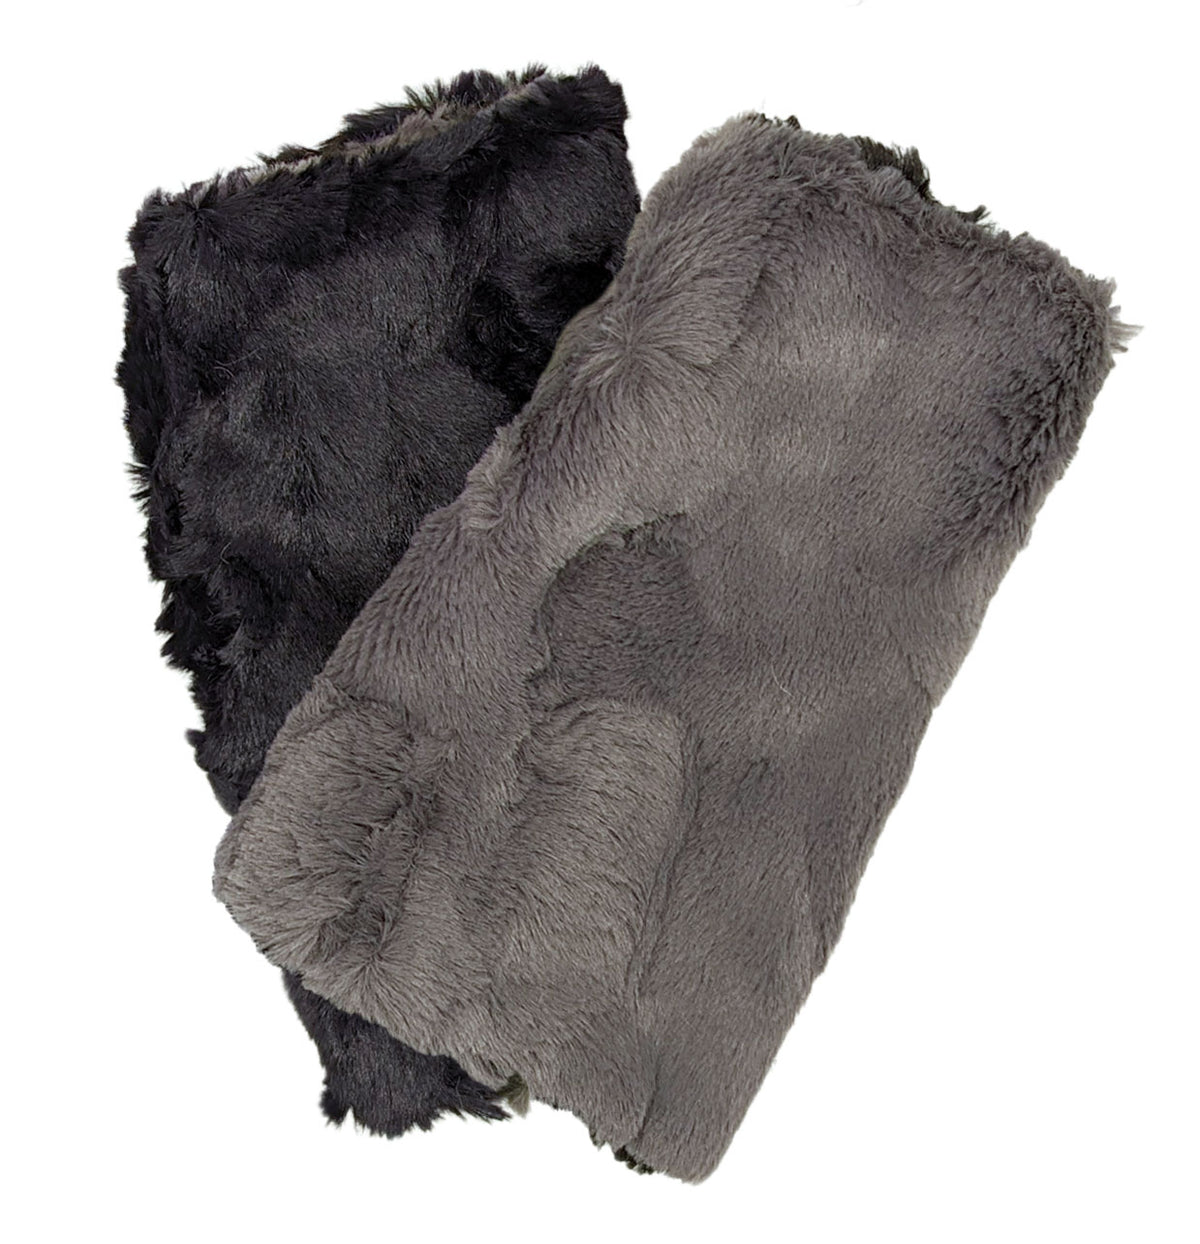 Fingerless Gloves | Cuddly Gray and Black Faux Fur | Pandemonium Millinery